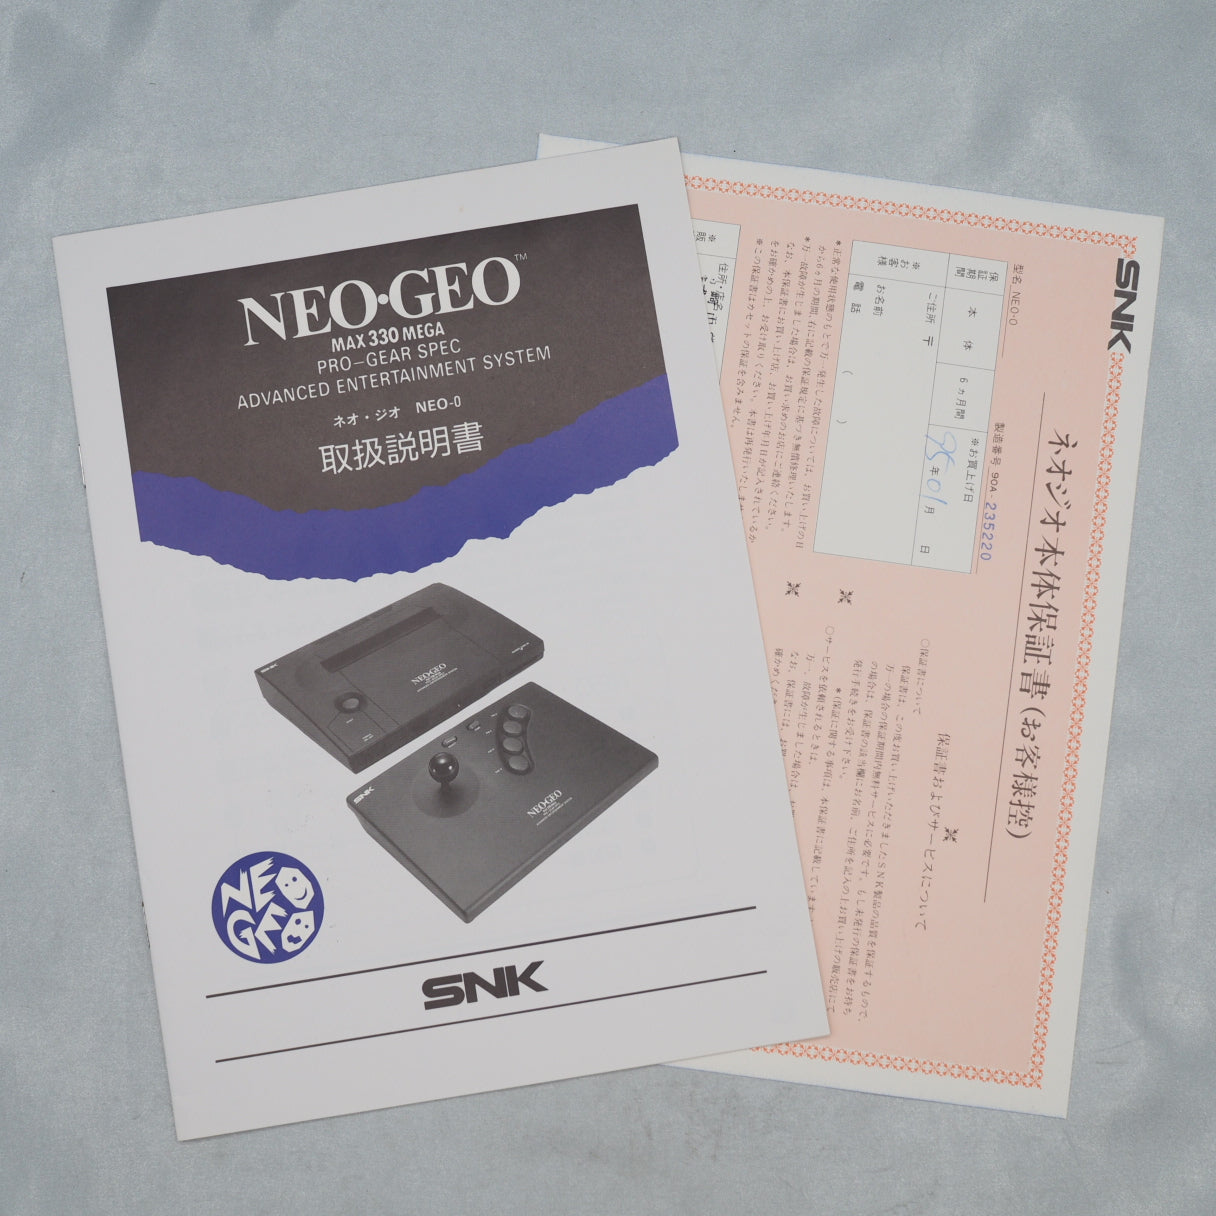 NEO GEO AES Console System Boxed